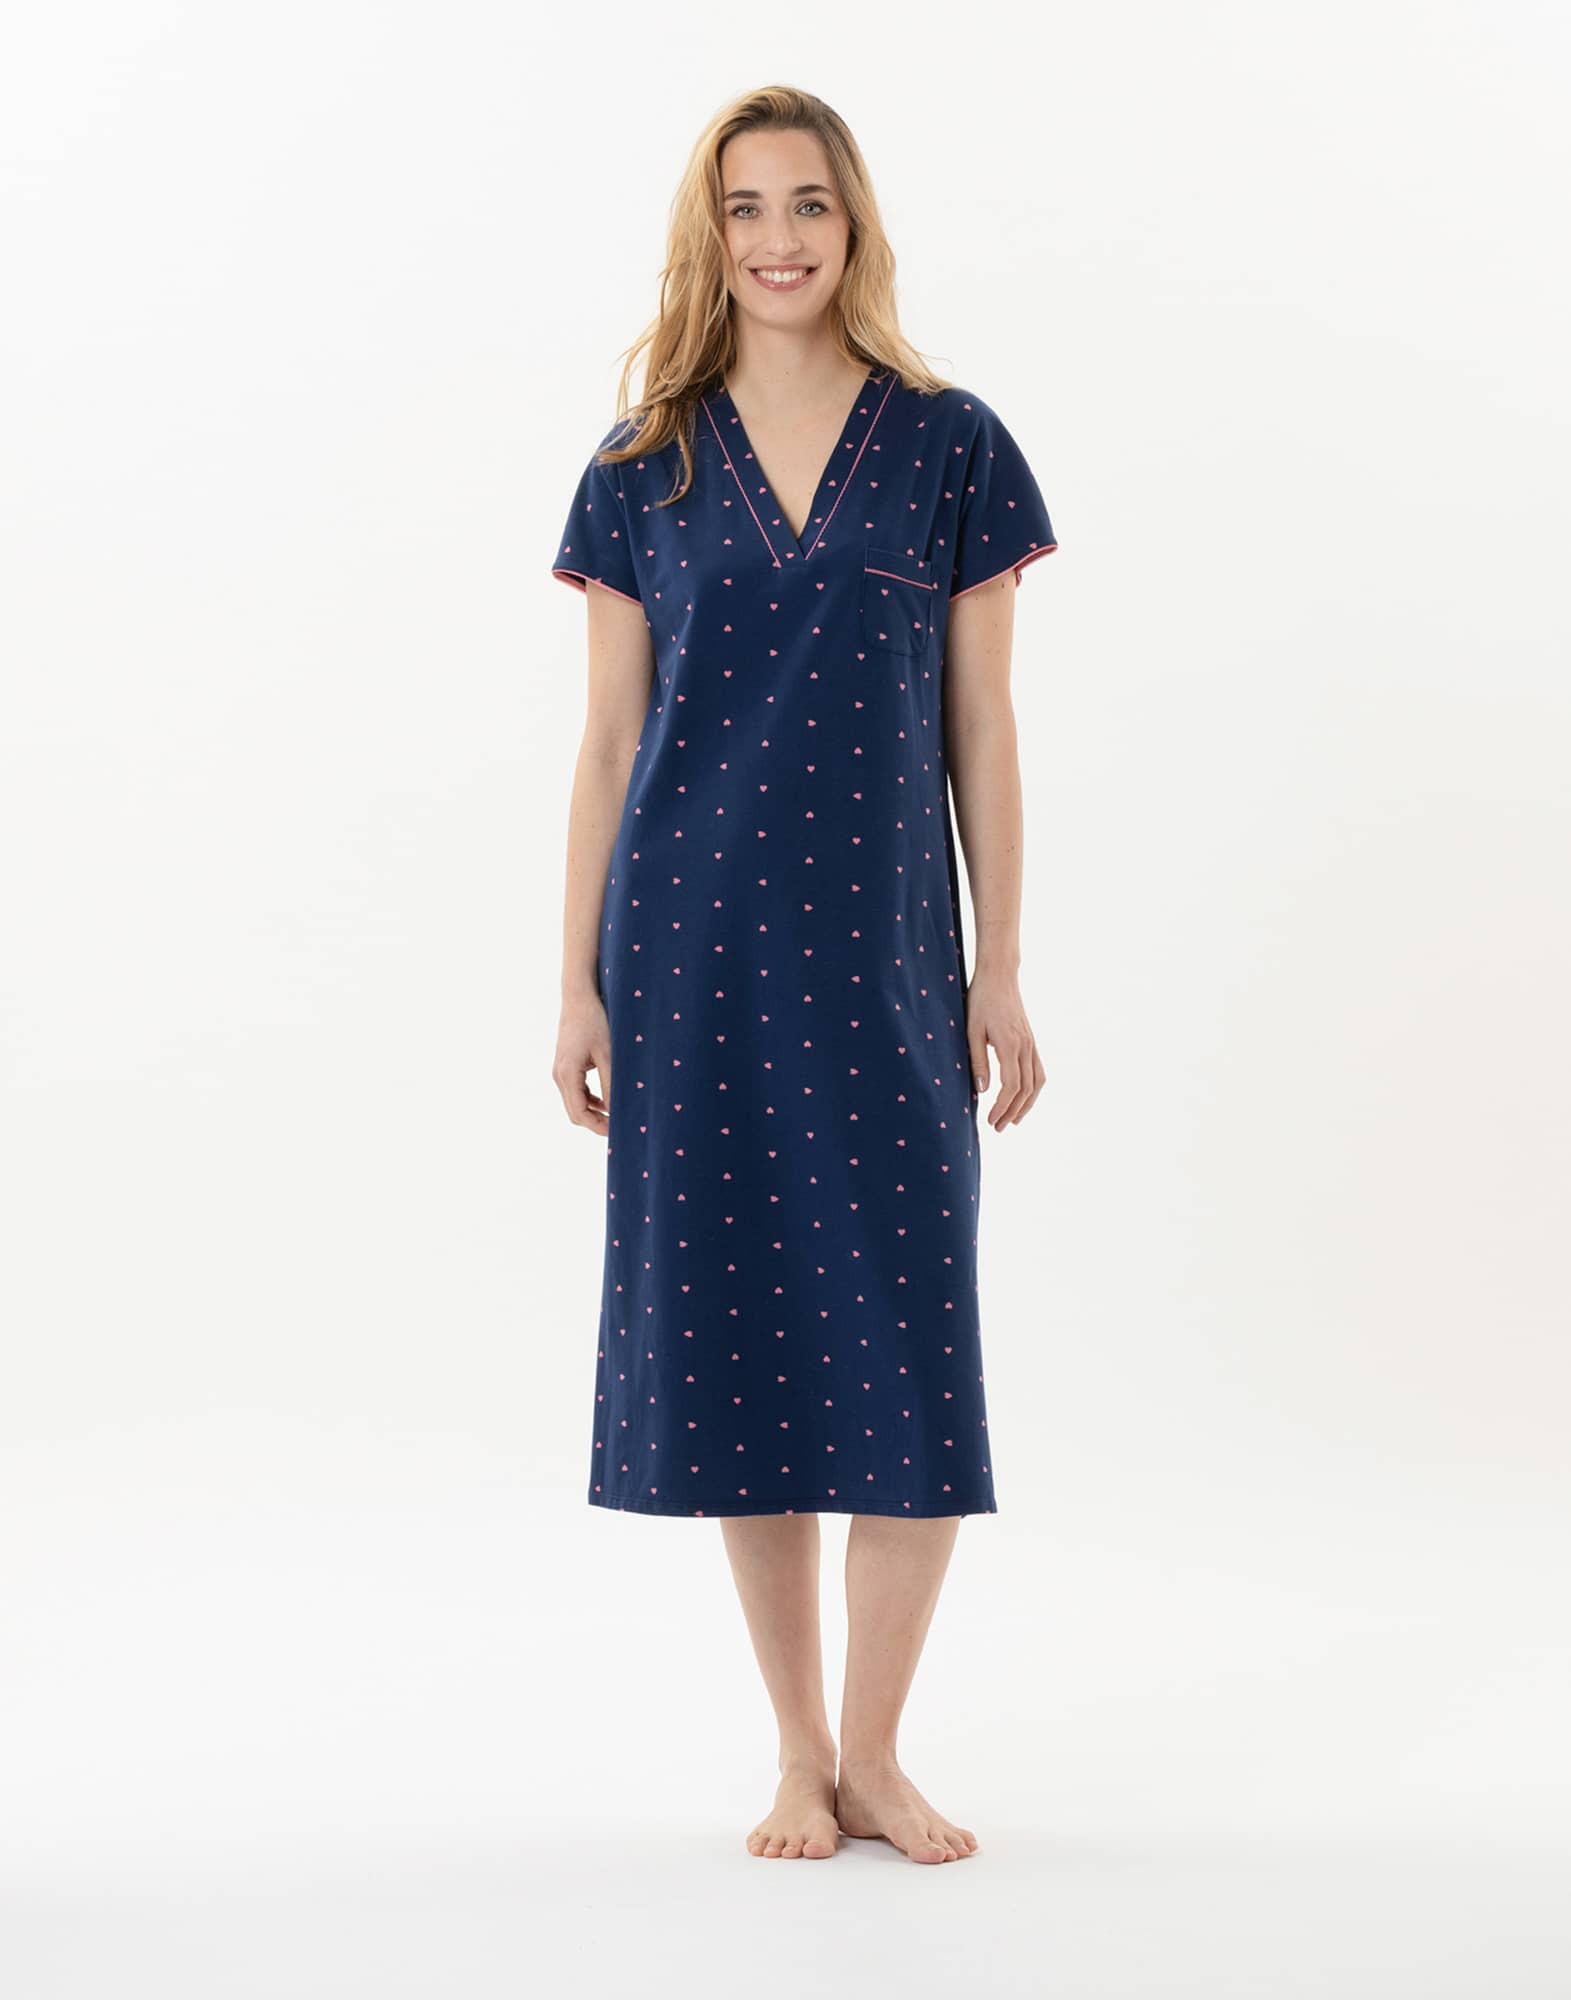 Long jersey nightshirt AMORE 711 navy | Lingerie le Chat